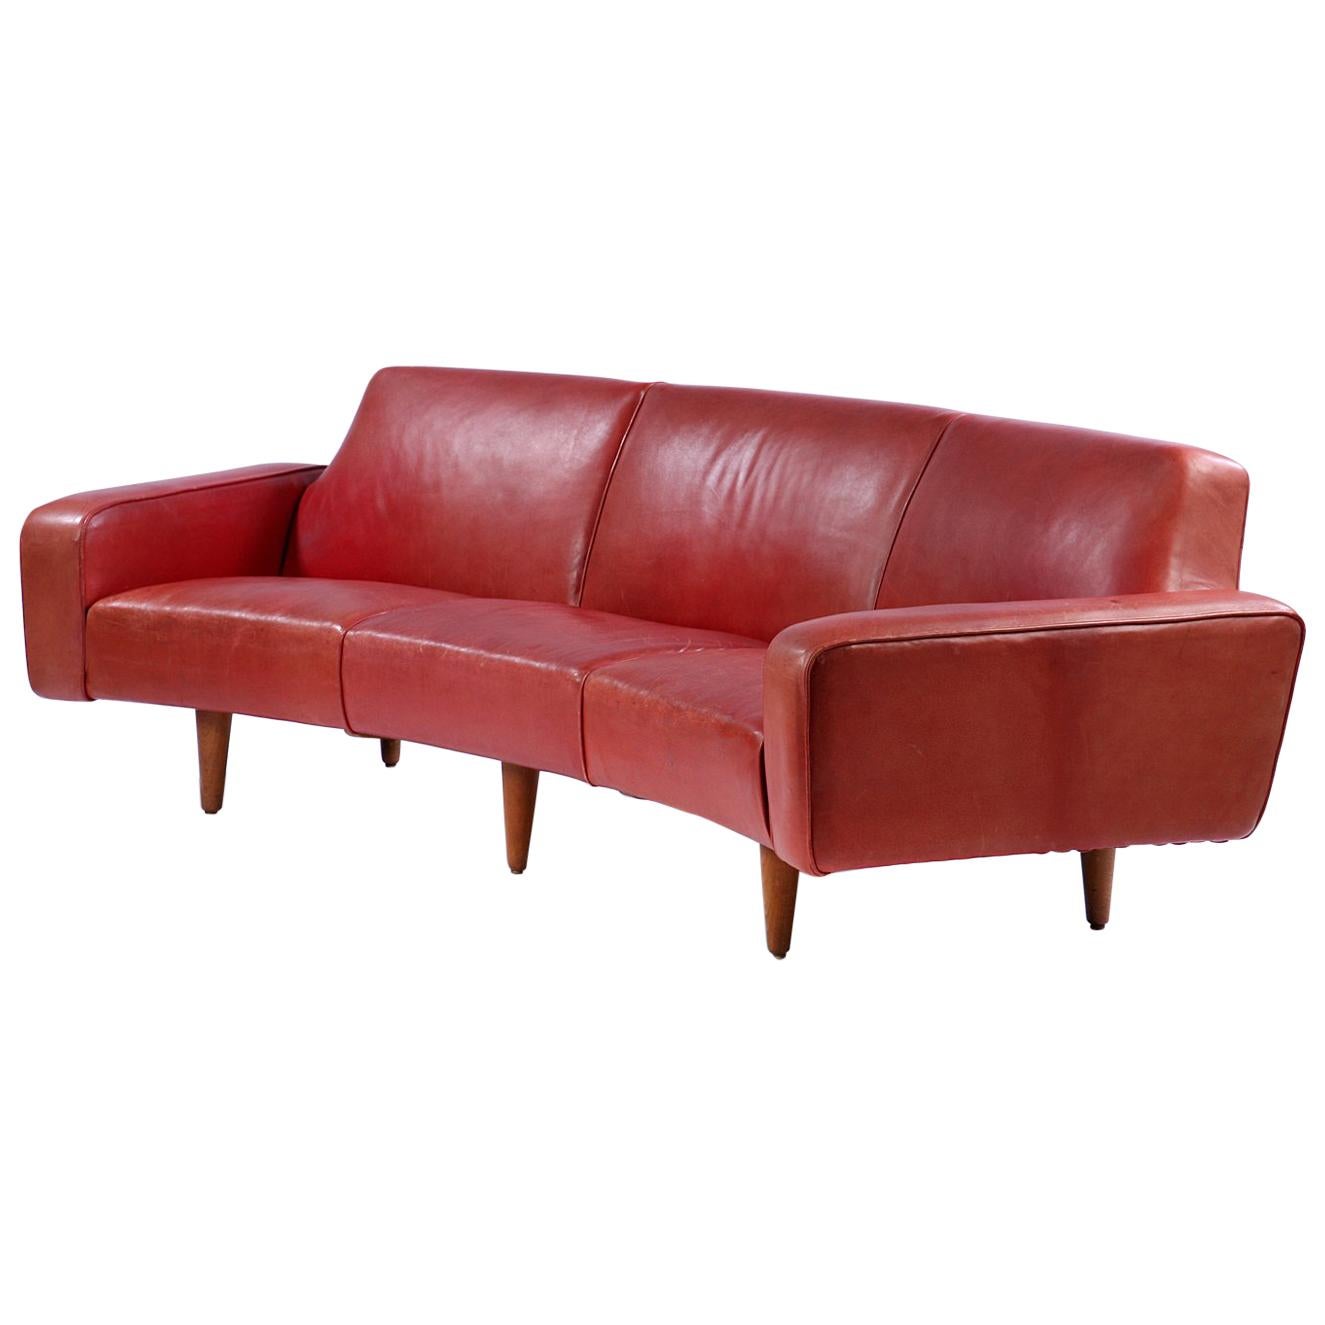 Illum Wikkelso Red Leather Sofa and Coffee Table, circa 1960s